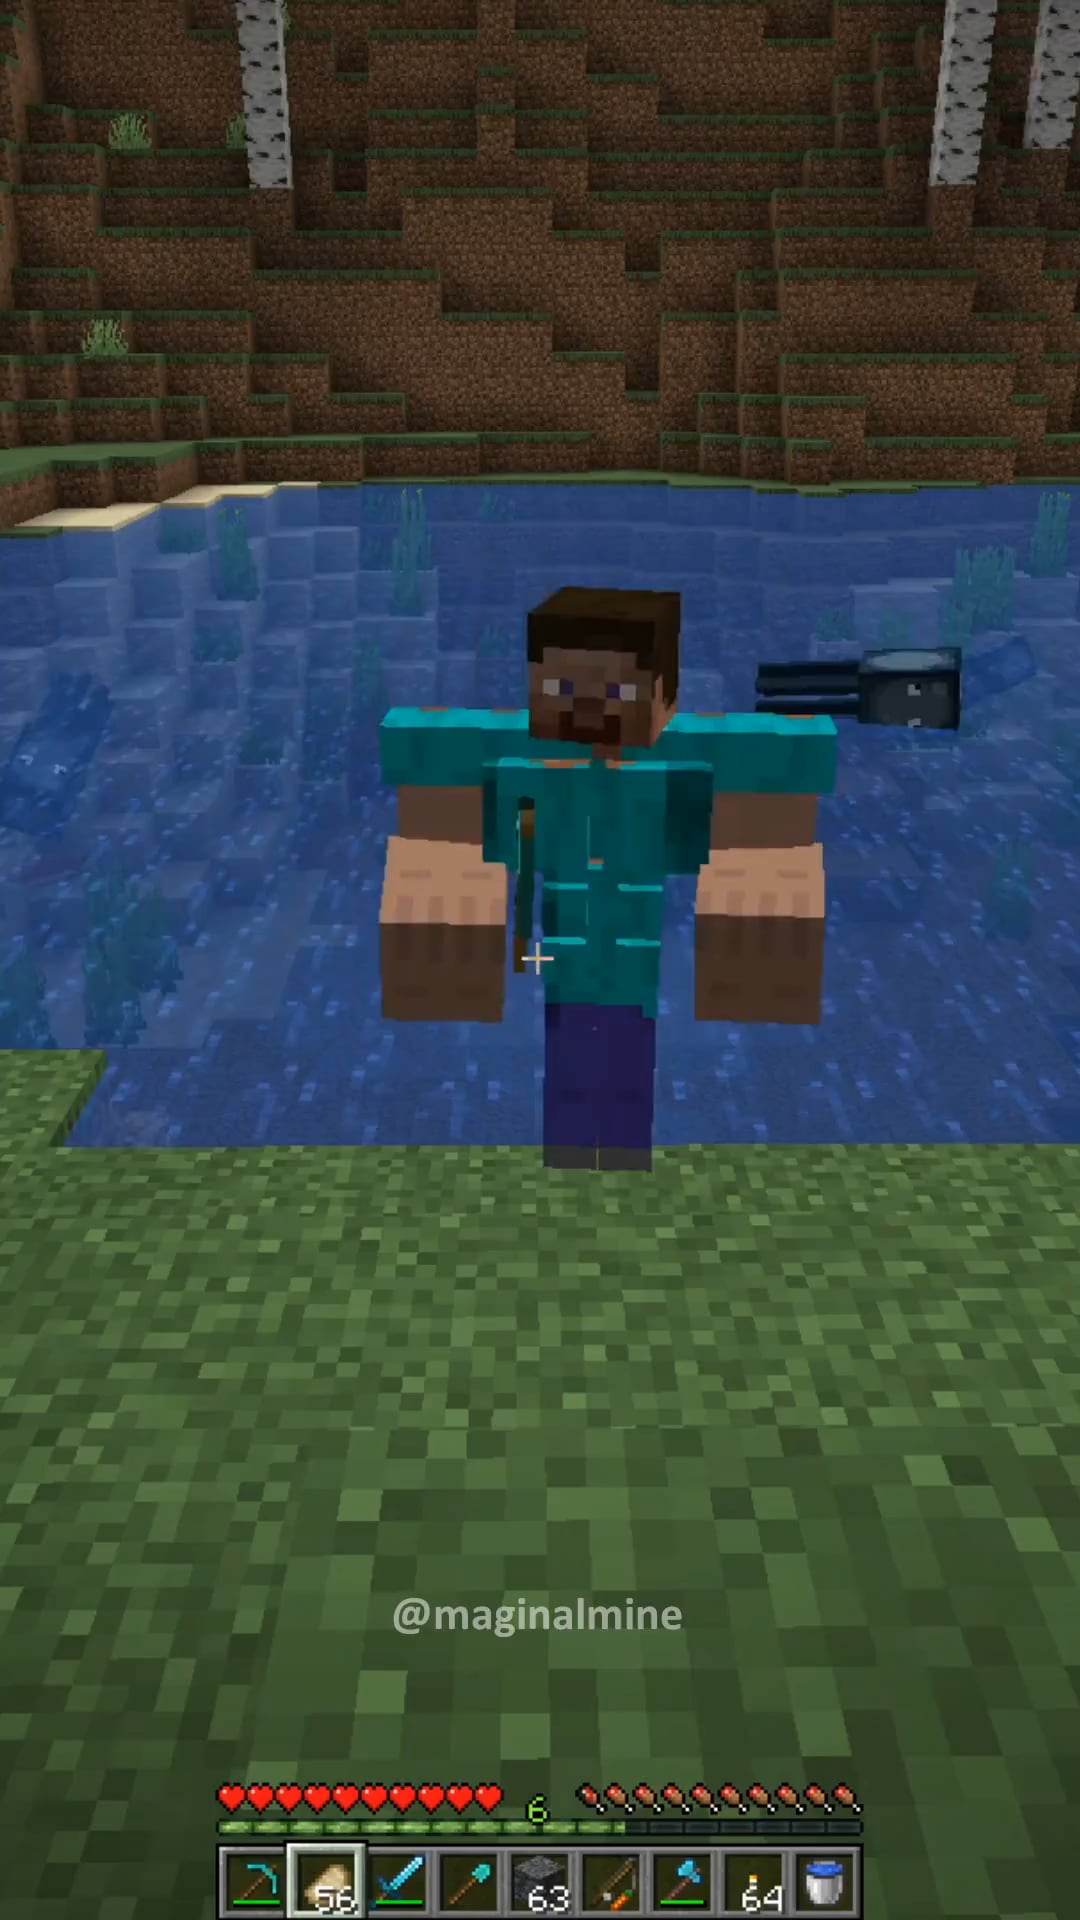 Minecraft Memes - "When your friend becomes GIGA Steve"